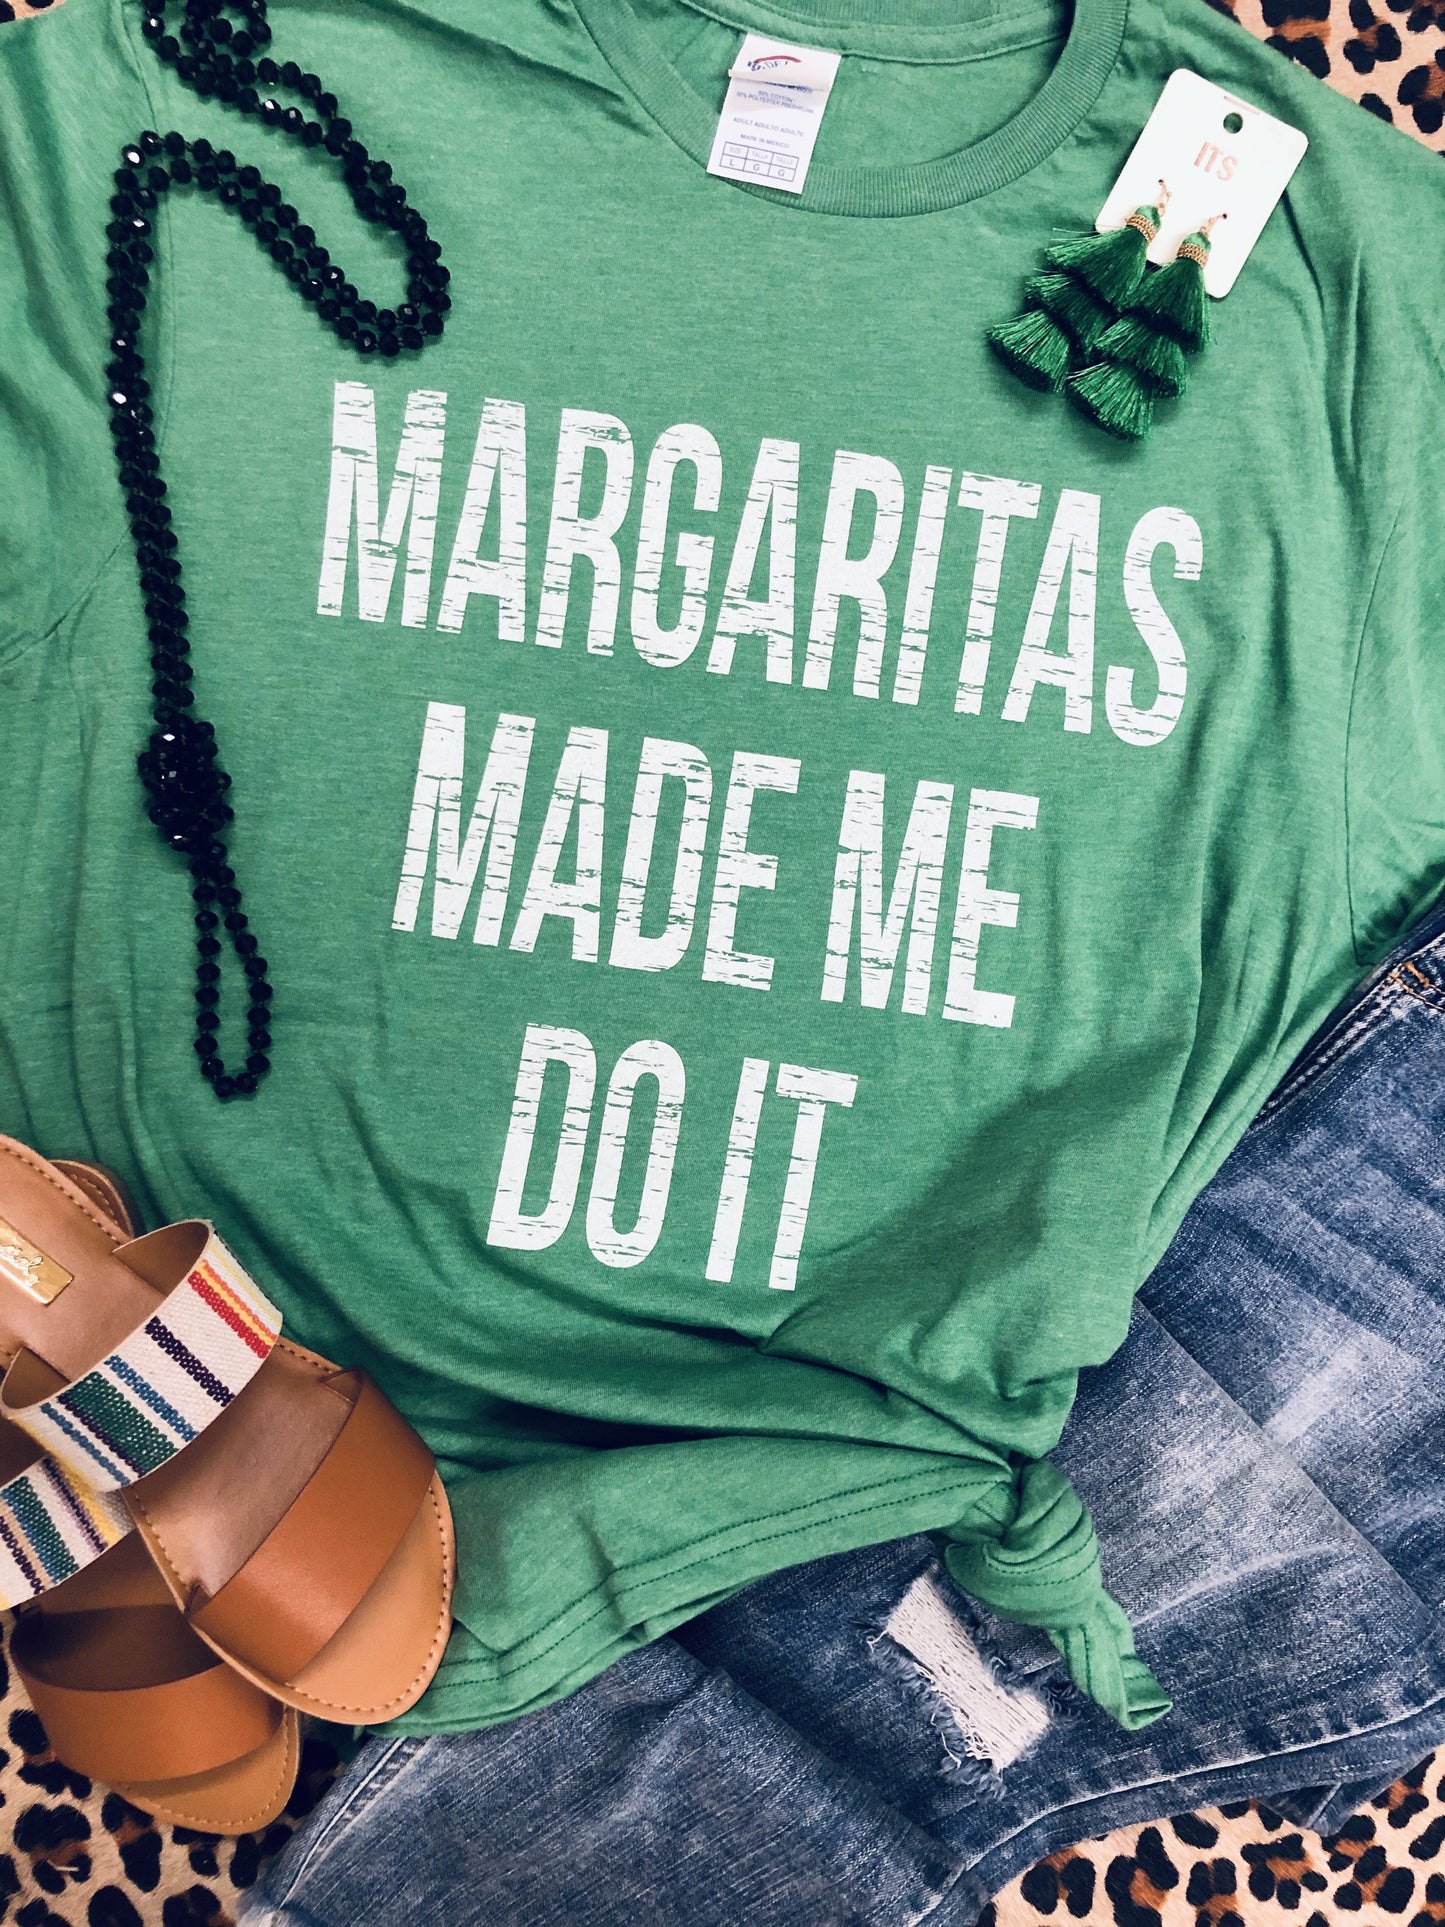 Margaritas Made Me Do It graphic tee